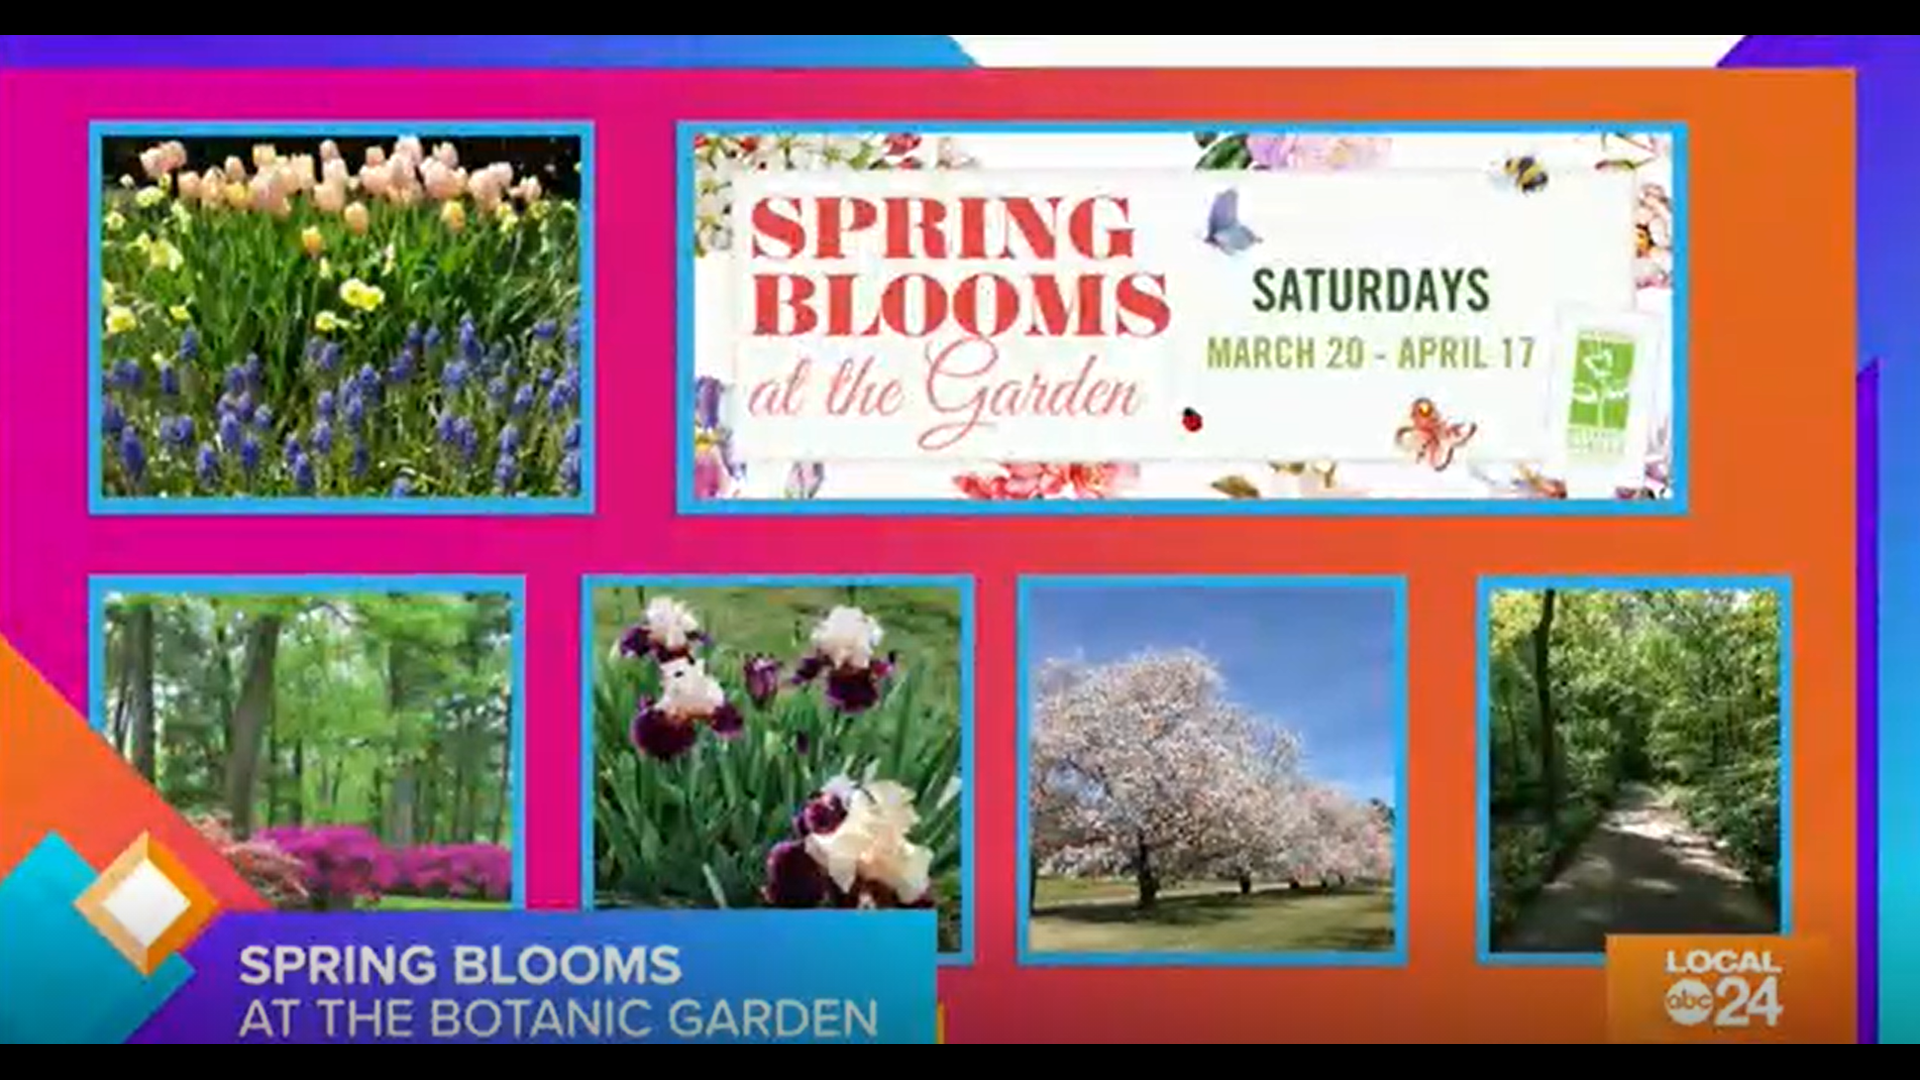 With spring finally in season, check out what the Memphis Botanic Garden has in store this year. Food trucks and fun for the whole family included! :)